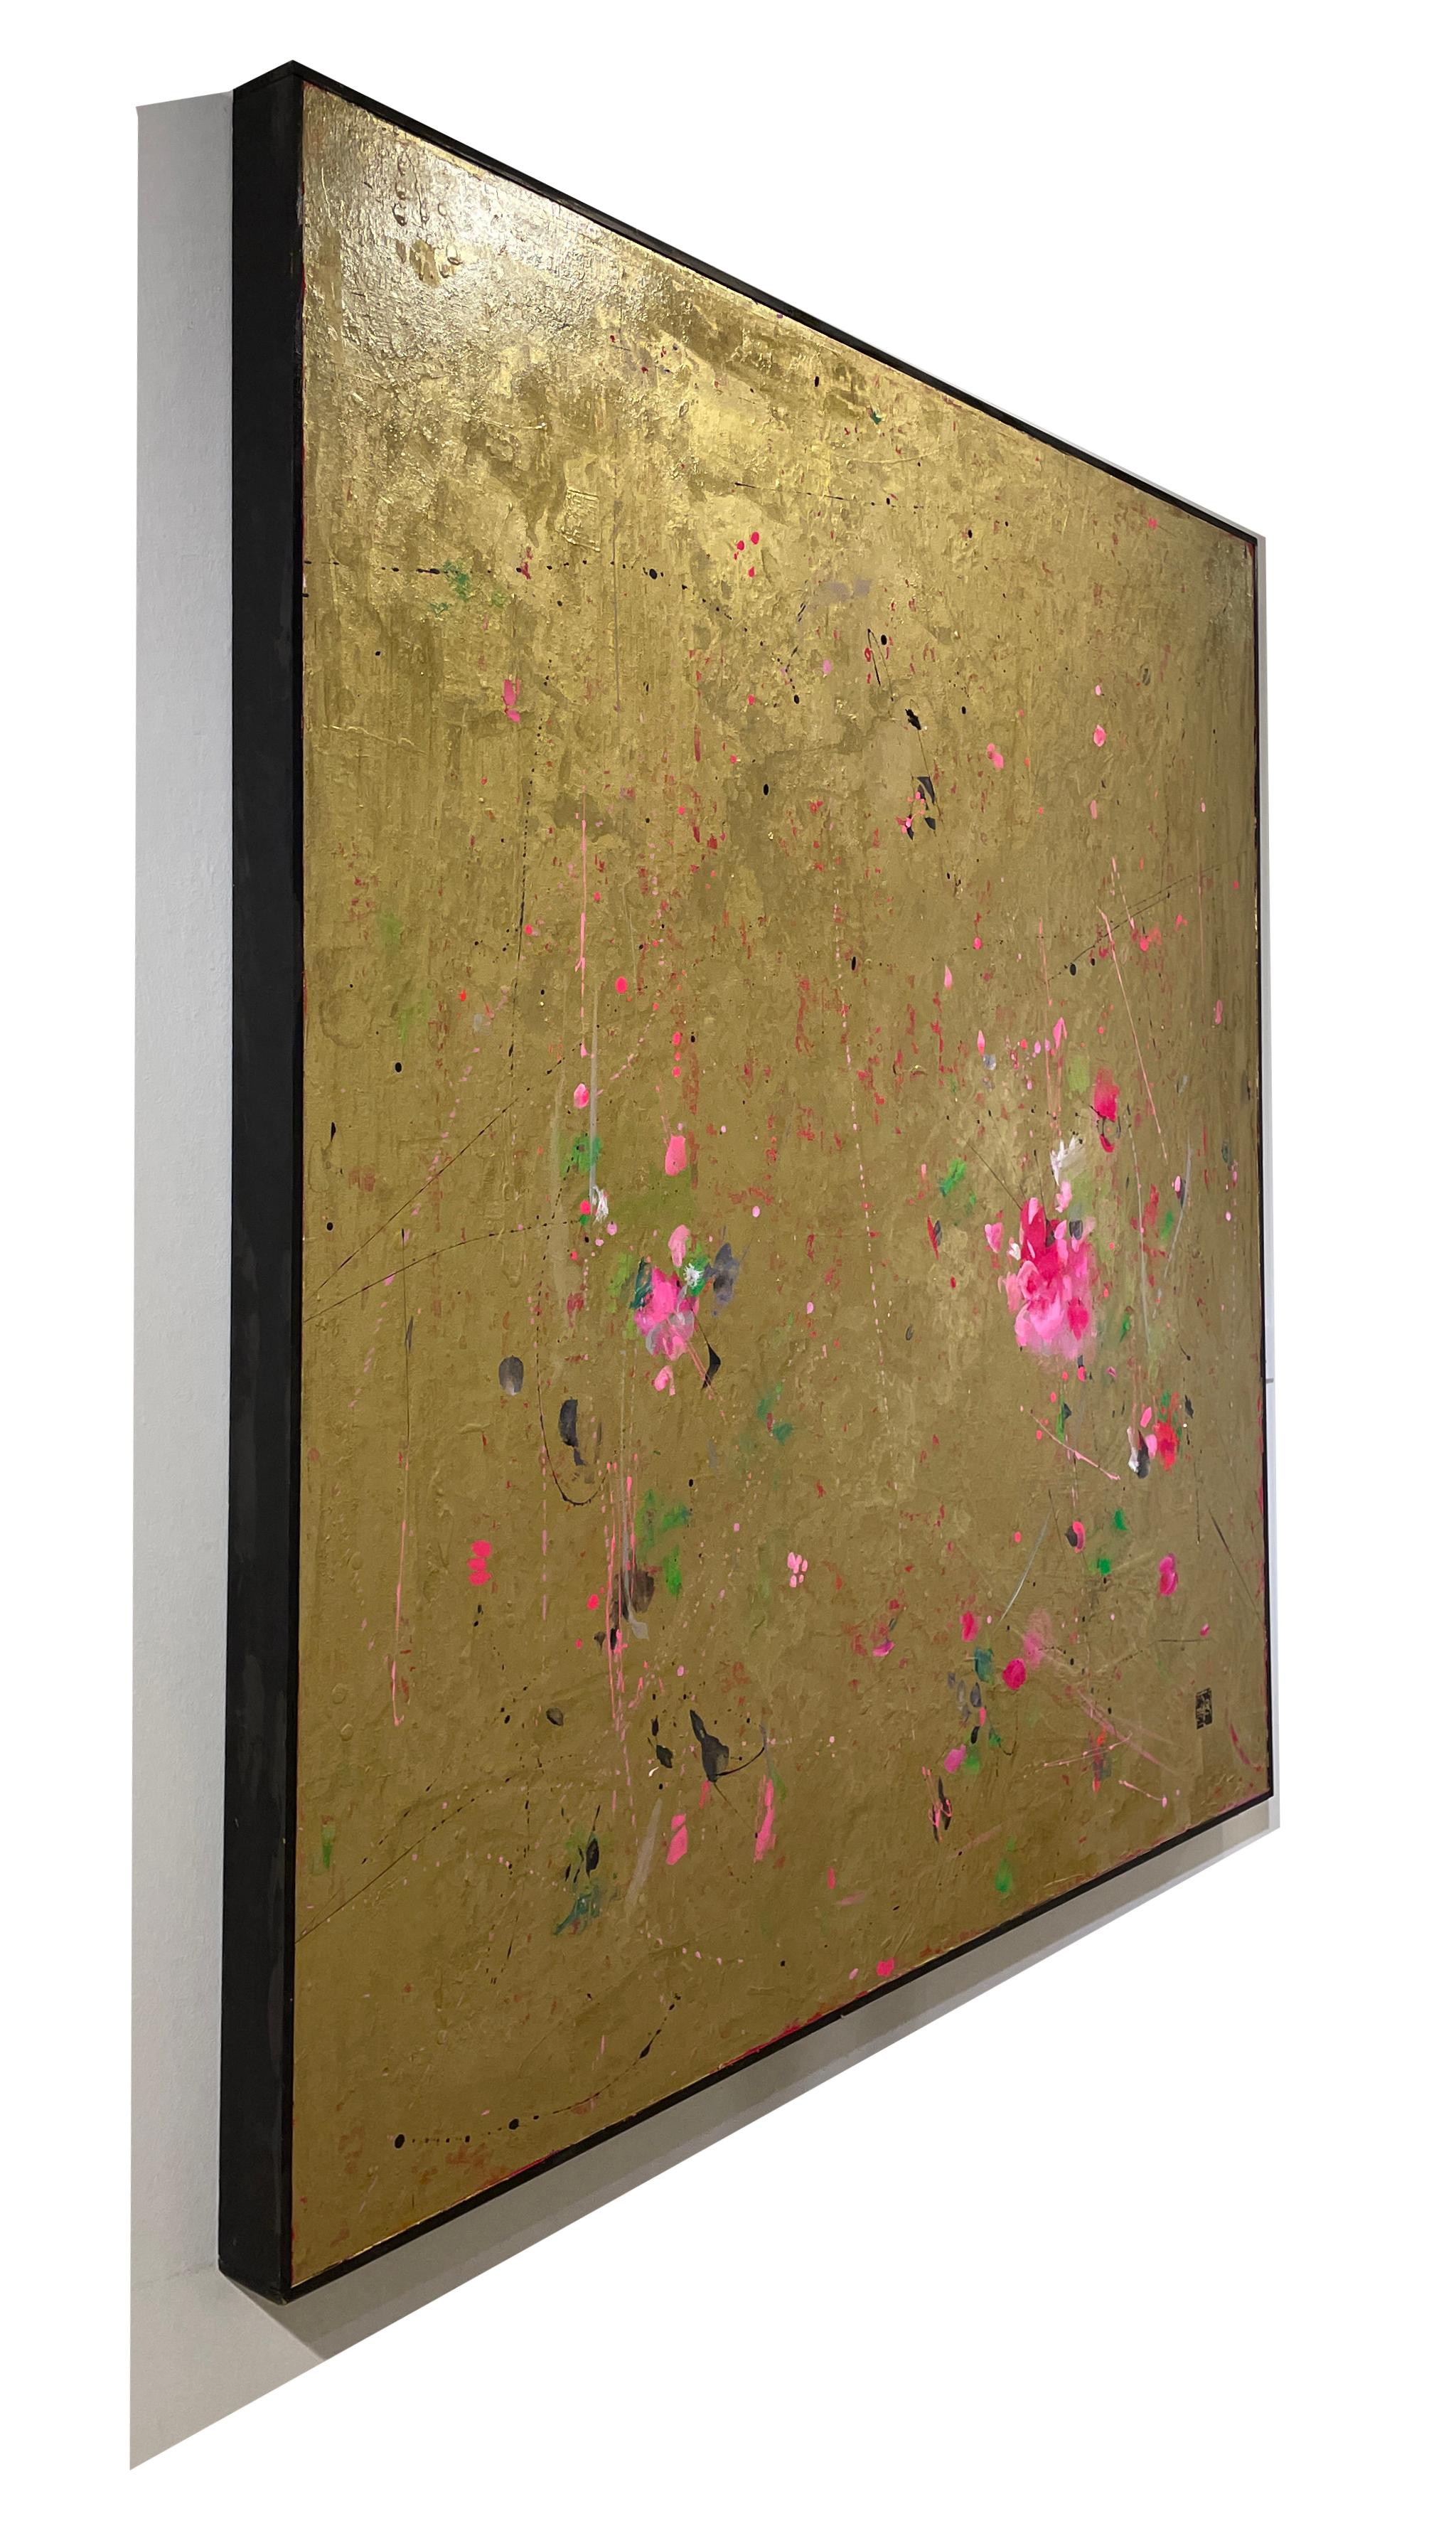 Let Me See the Further Thing - Floral Patterns and Gold, Abstract Painting 1